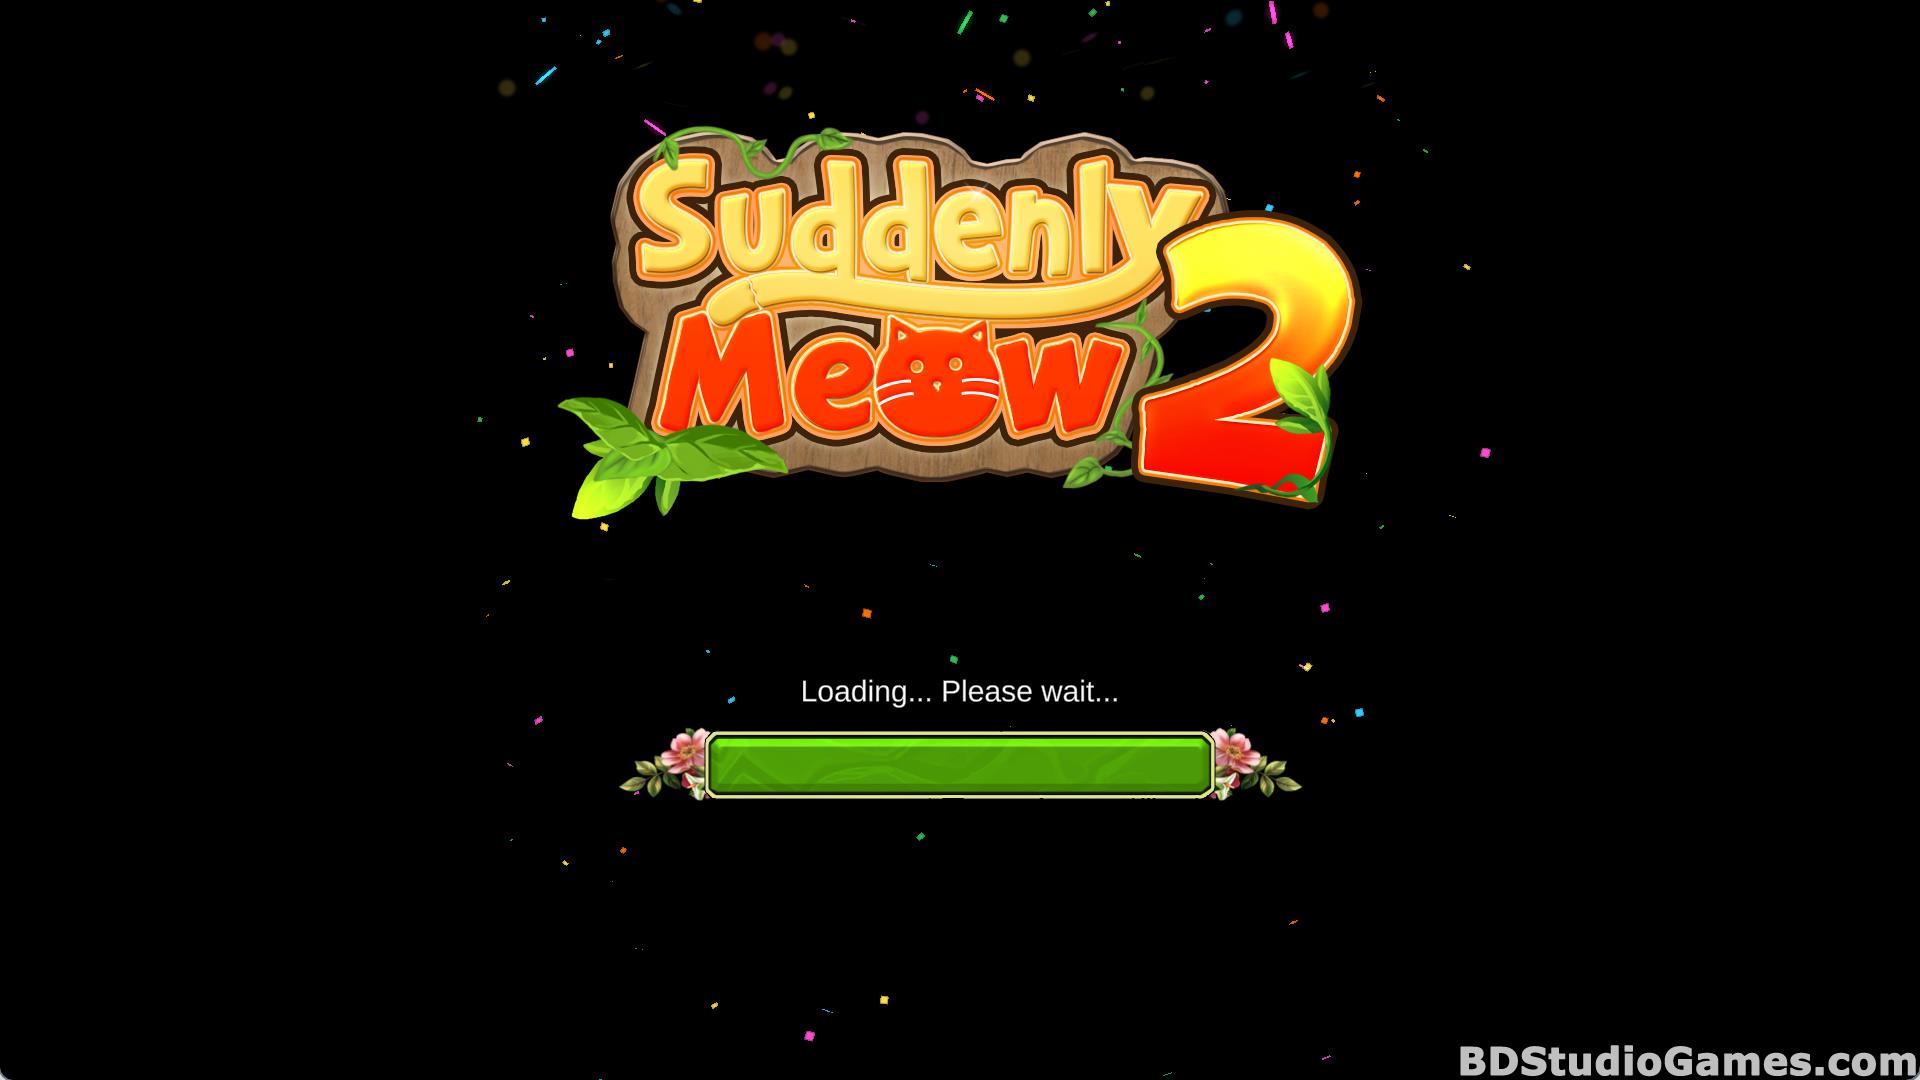 Suddenly Meow 2 Free Download Screenshots 05